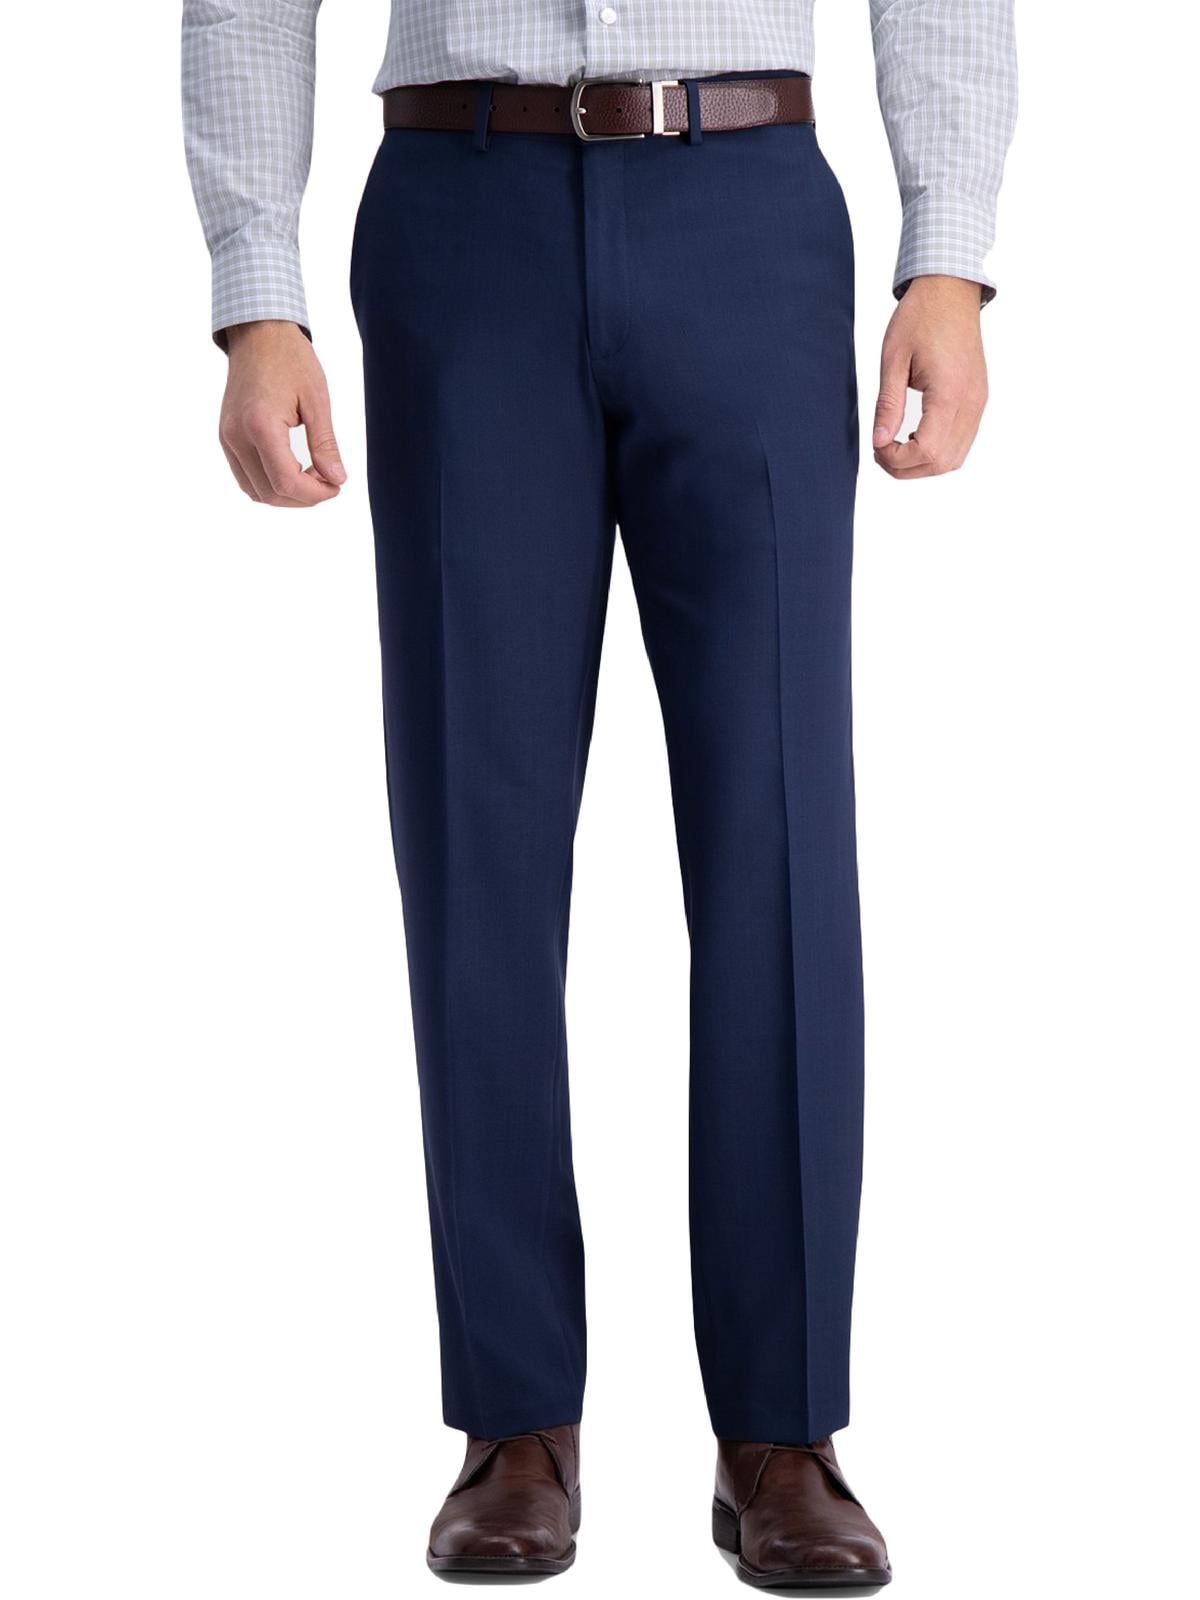 Kleding Herenkleding Broeken Men's dress pants 42 32 Pleated wrinkle resistant classic fit brand new with tags Free shipping 